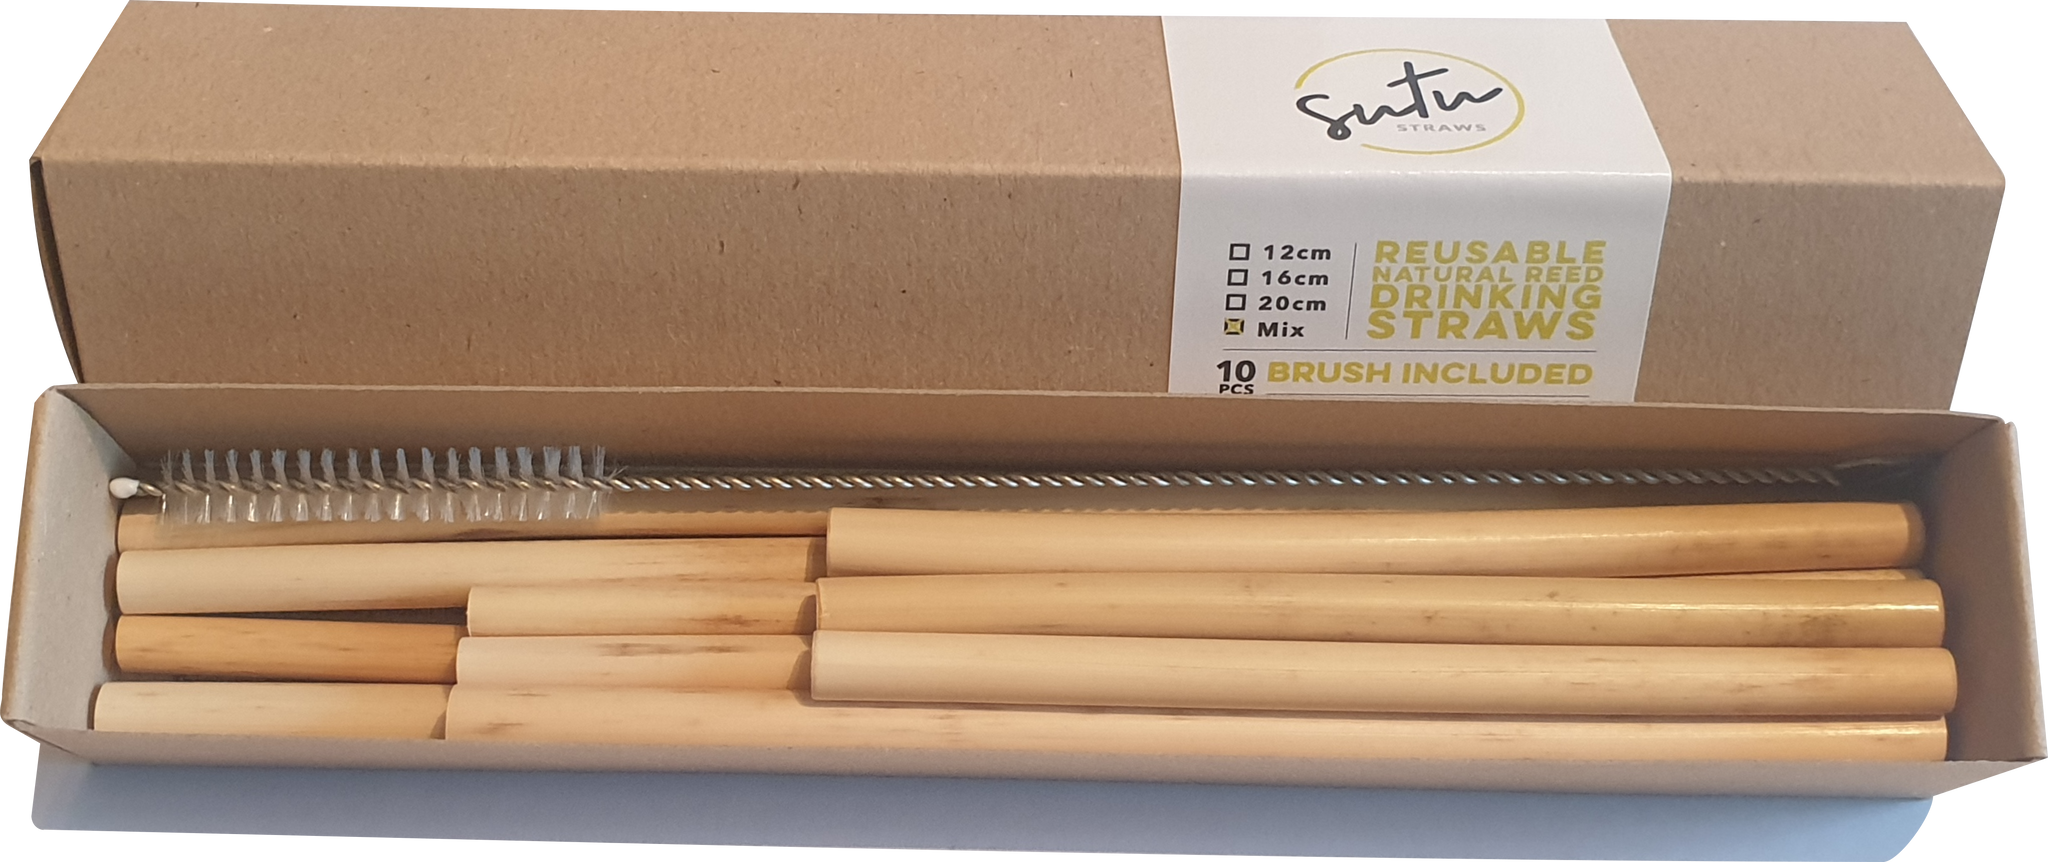 Sutu Natural Reed Drinking Straws - 10x Mixed Length plus Cleaning Brush (12, 16 & 20cm)